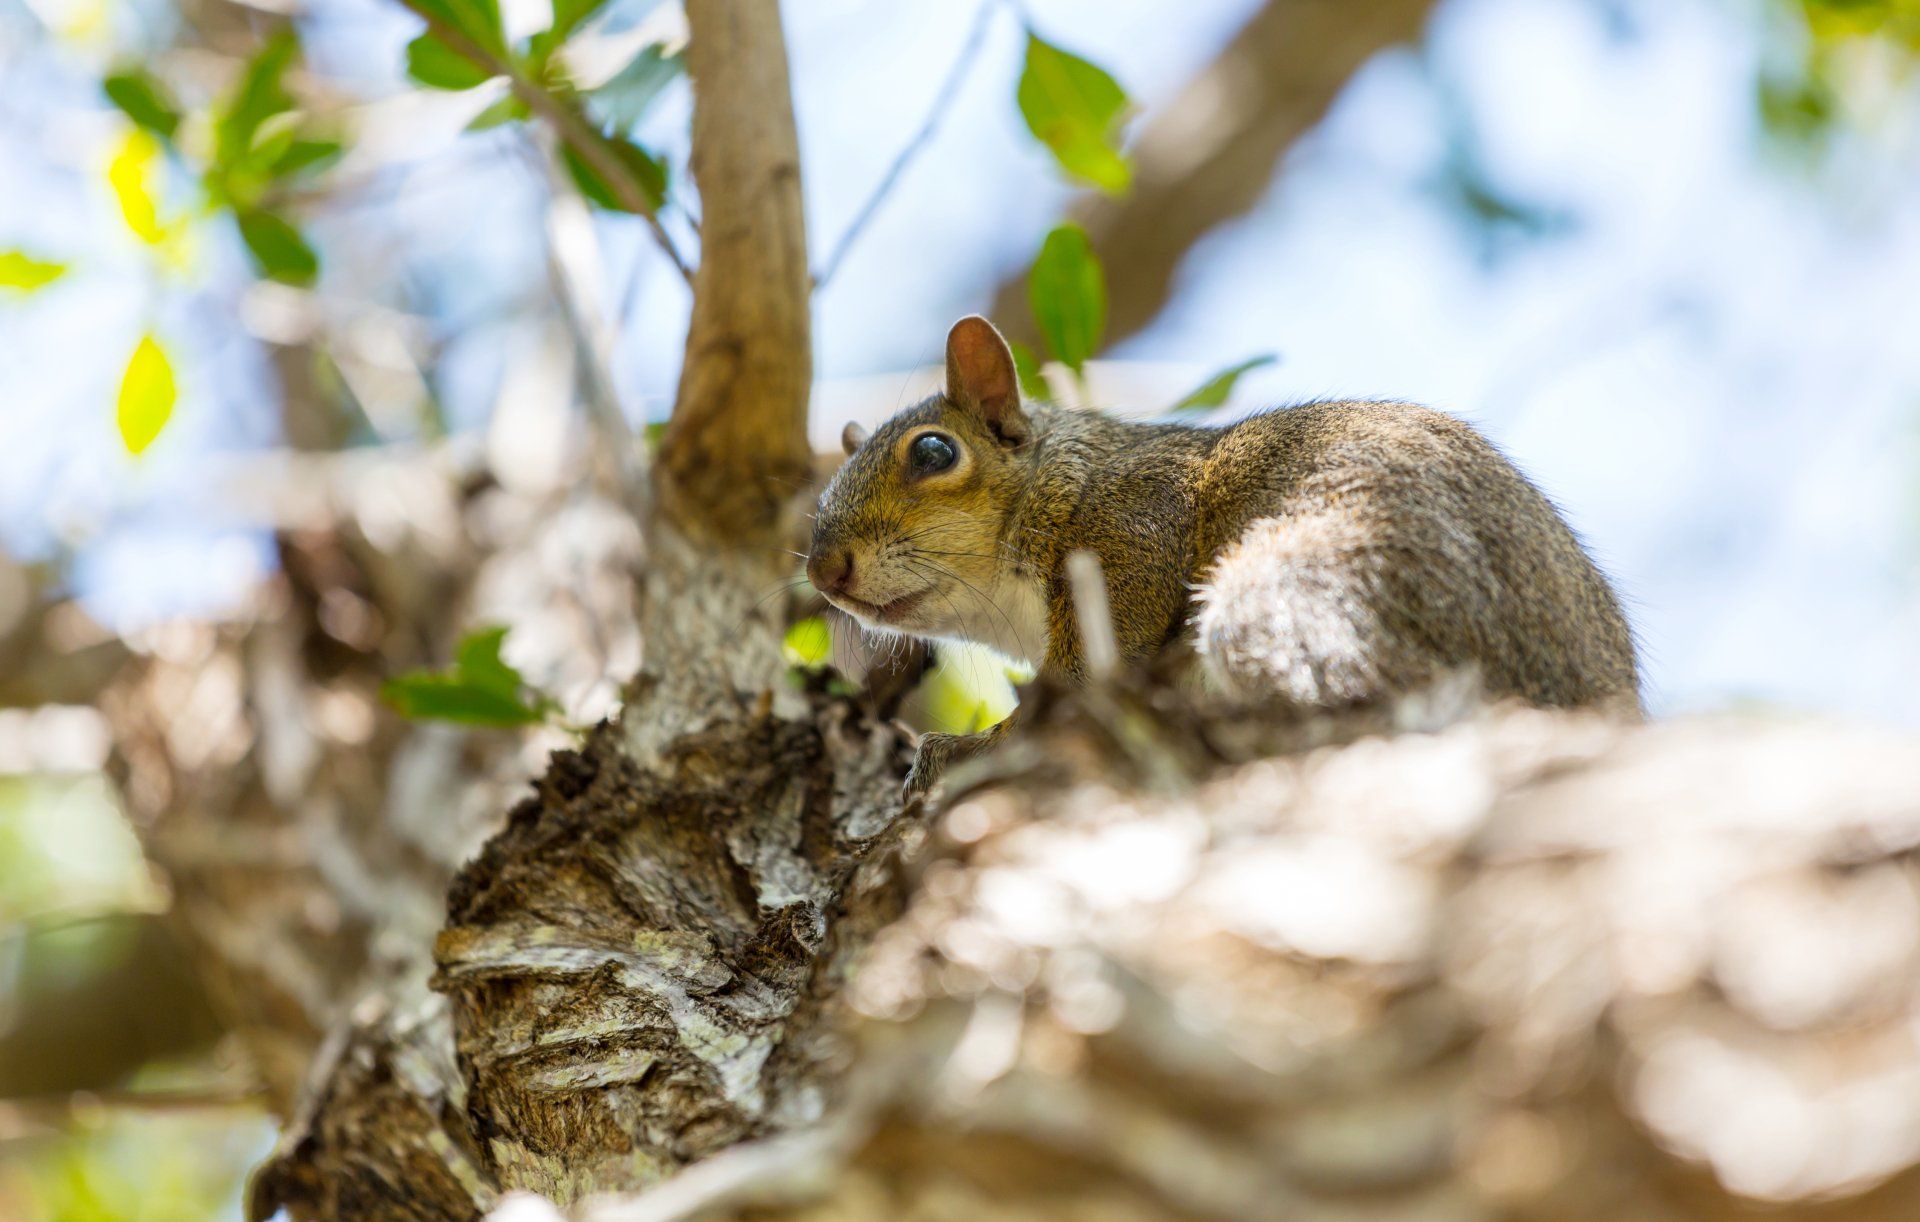 Keep Your Trees Protected From Wildlife With These Tips From Braik's Tree Care